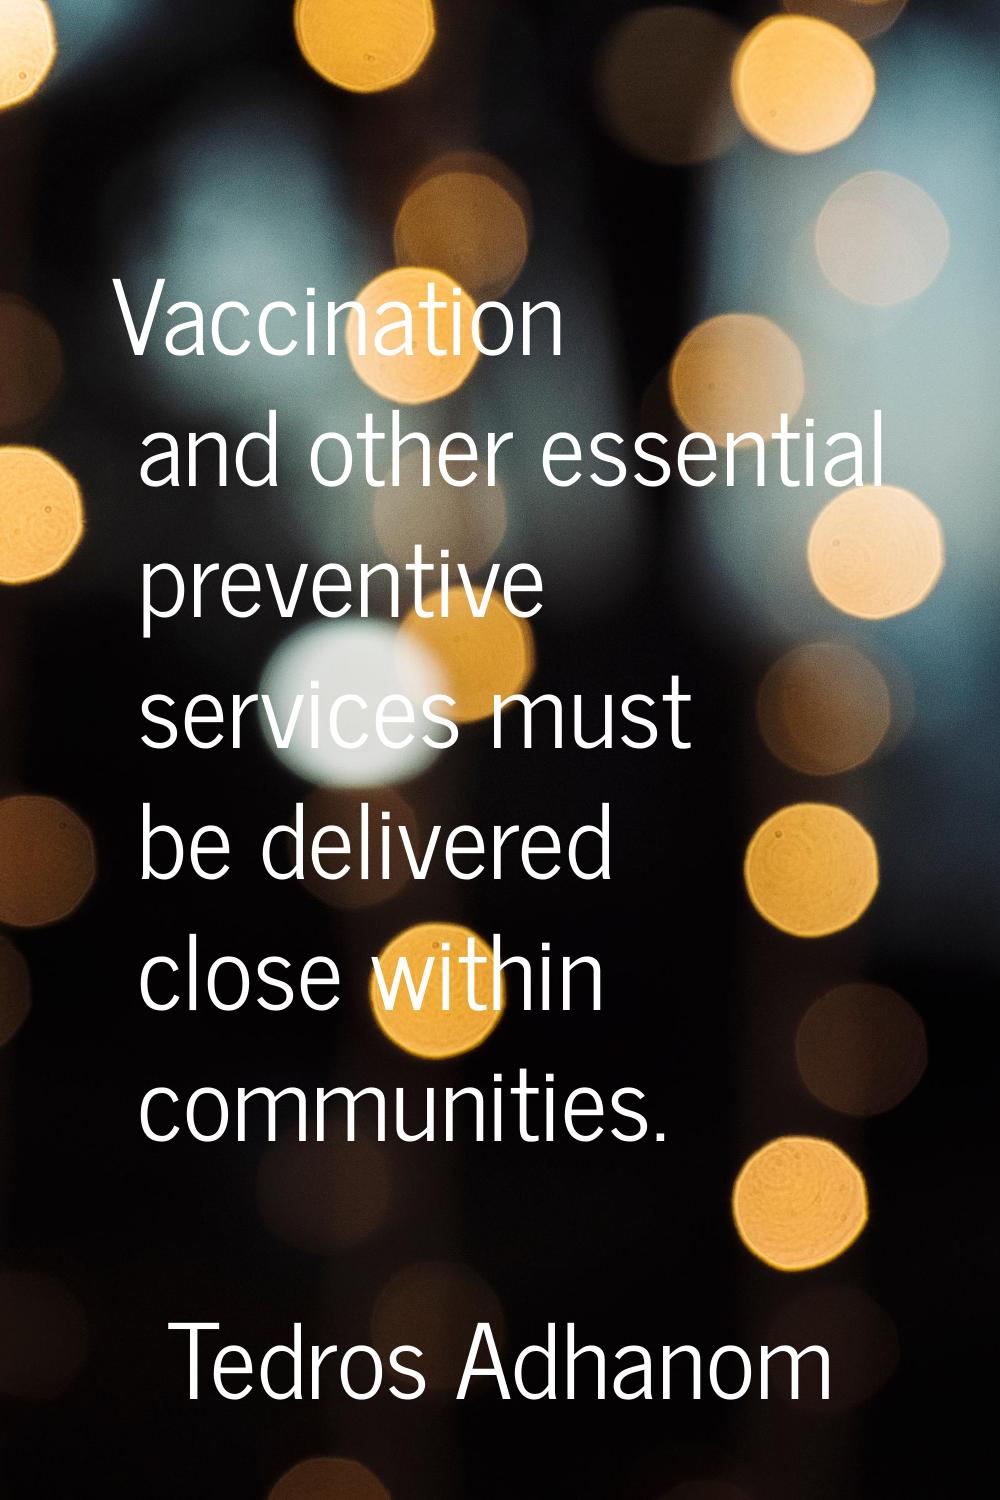 Vaccination and other essential preventive services must be delivered close within communities.